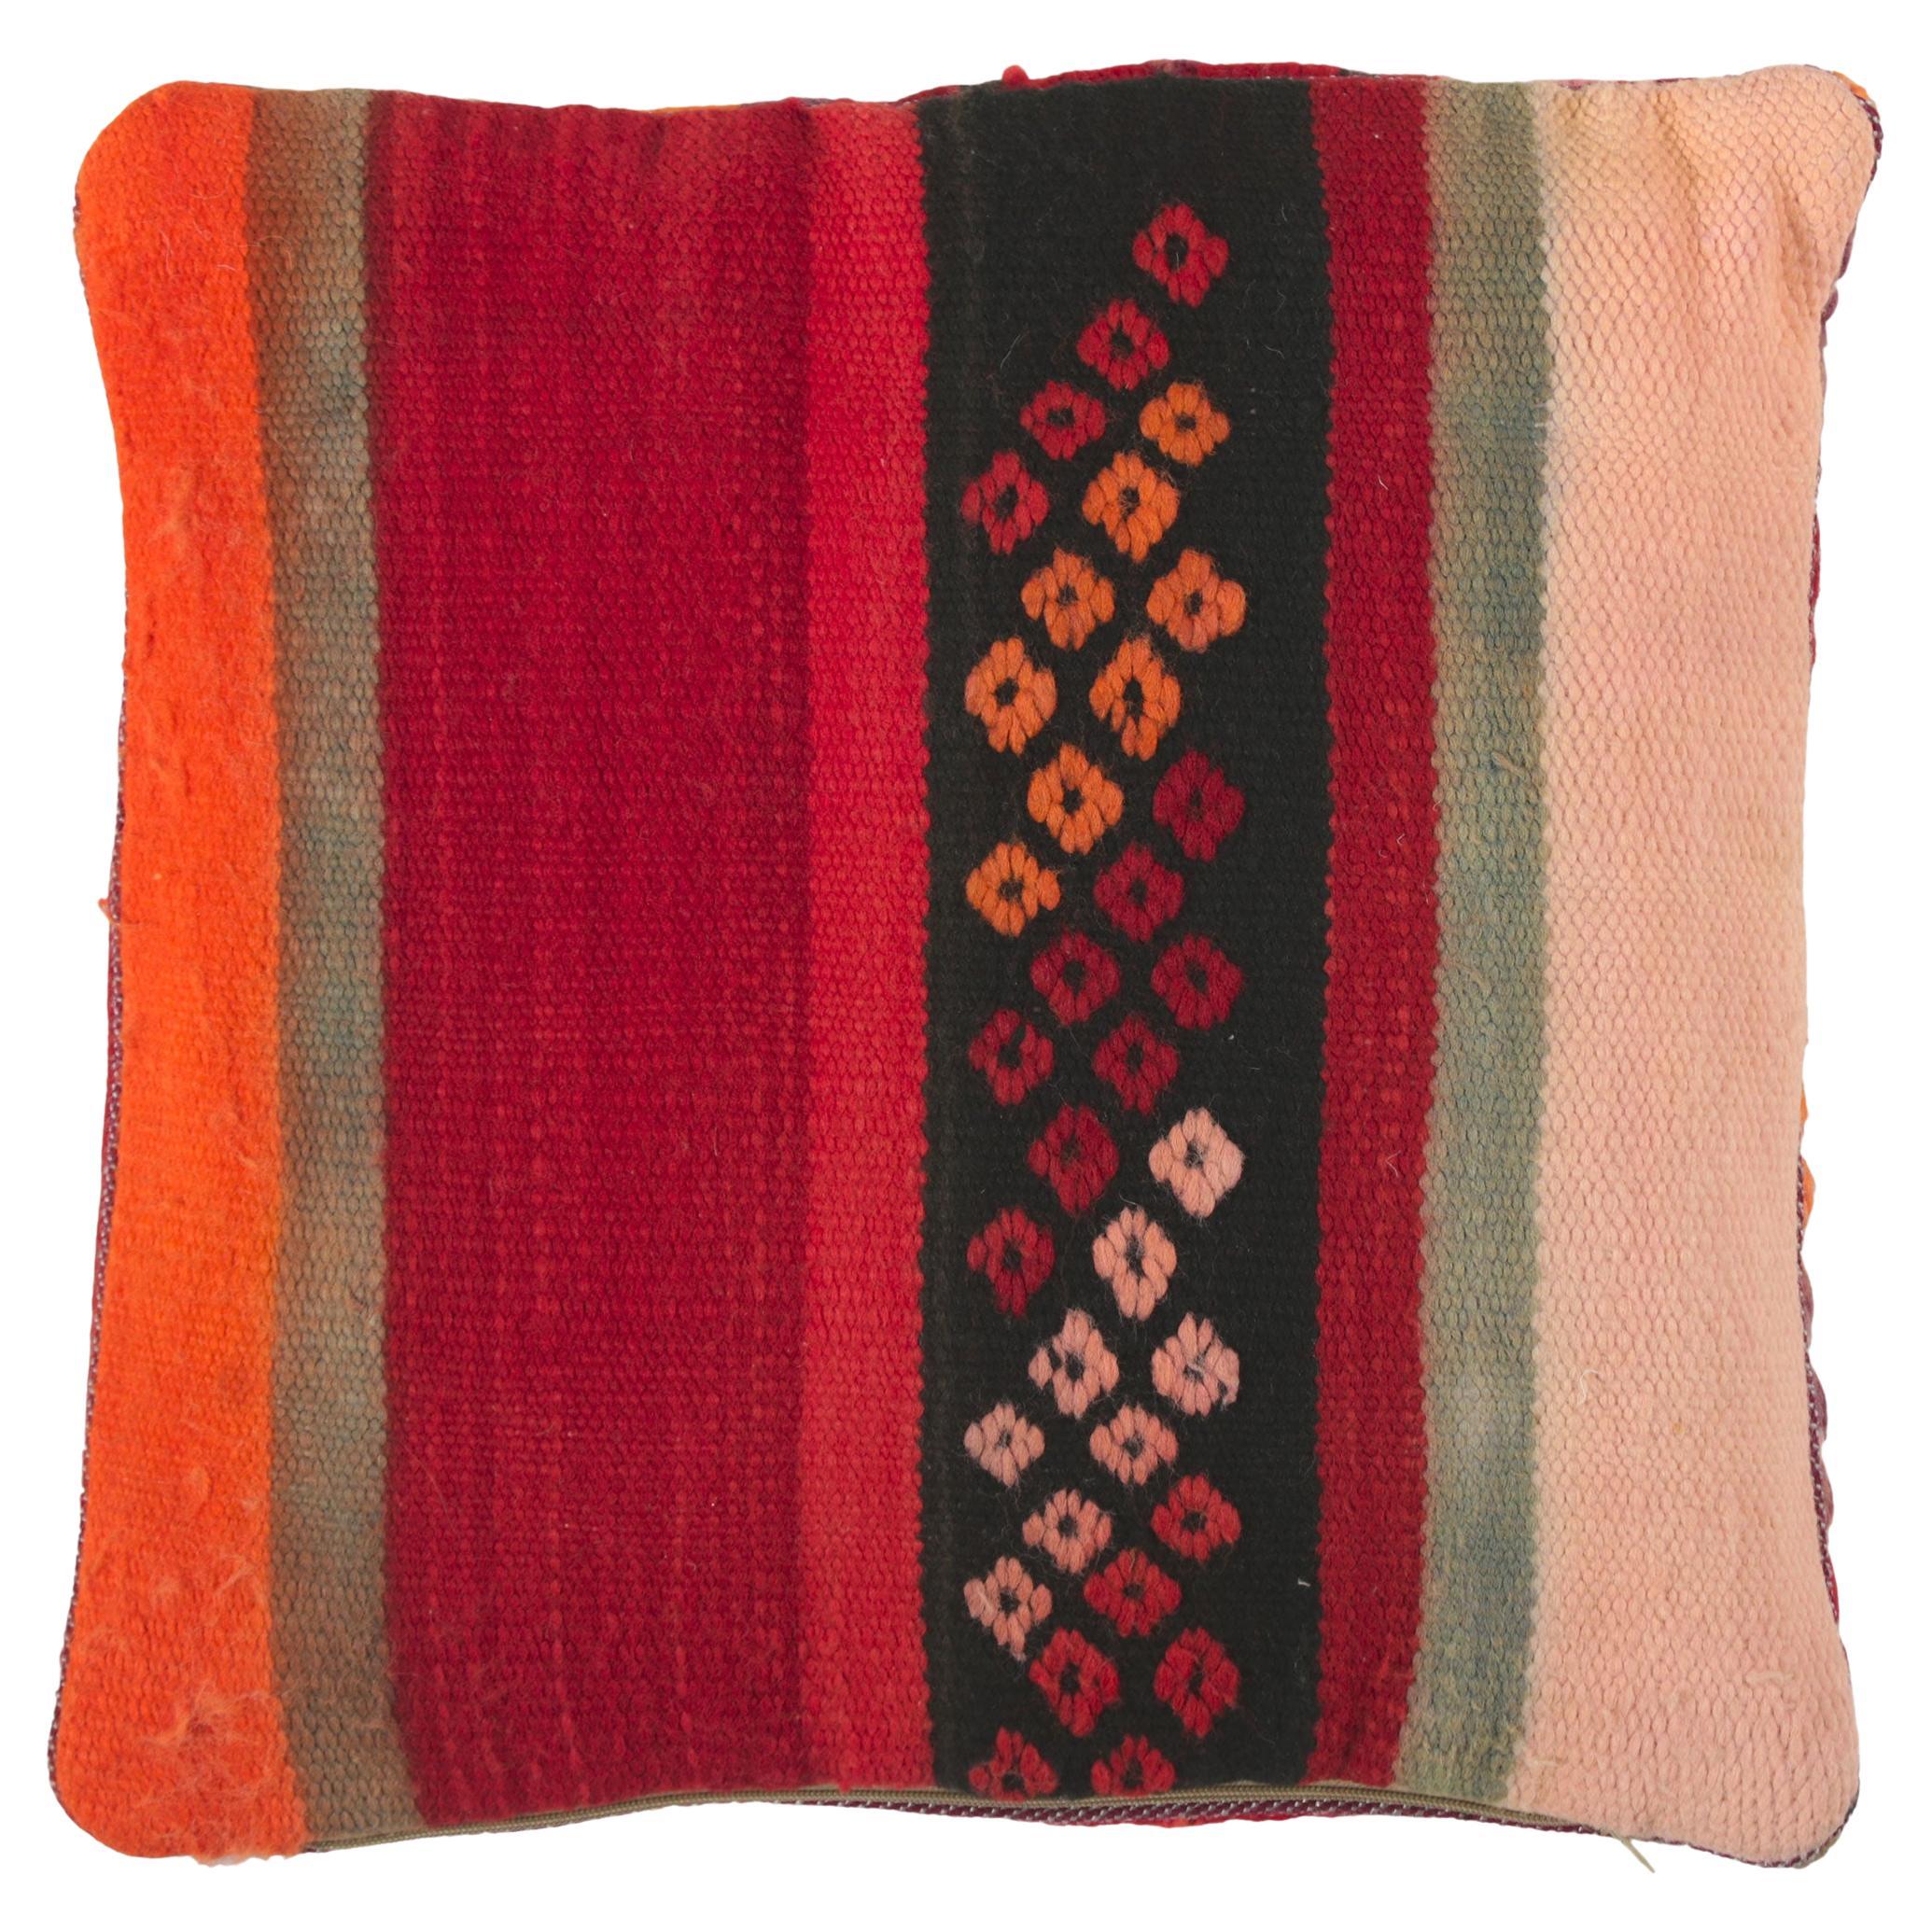 Vintage Moroccan Rug Pillow by Berber Tribes of Morocco